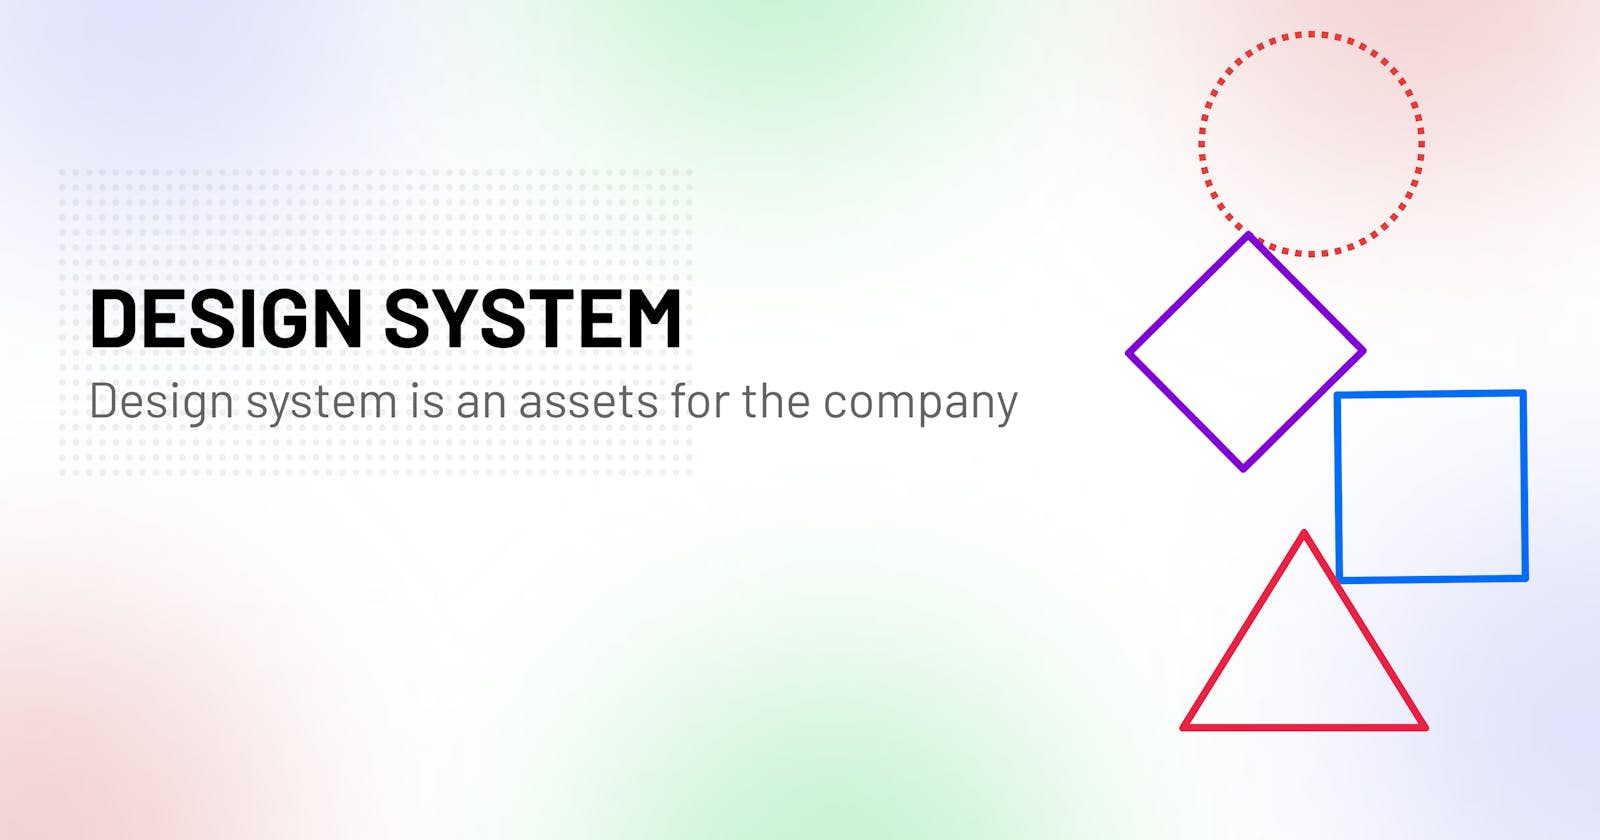 Design system is an assets for the company